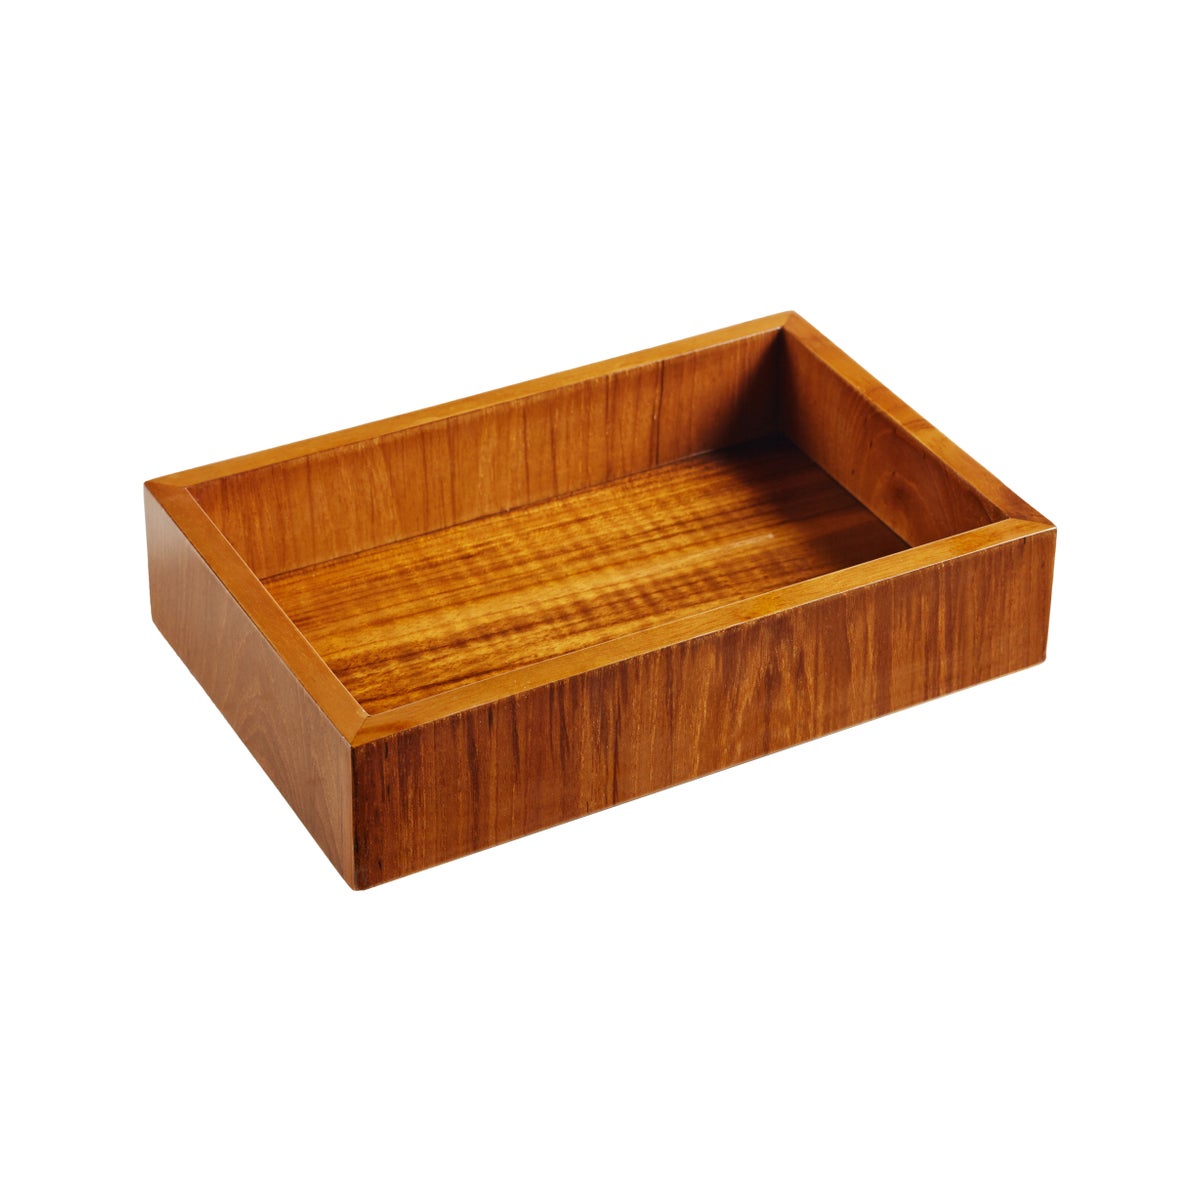 Captain's Amenities Tray in Natural